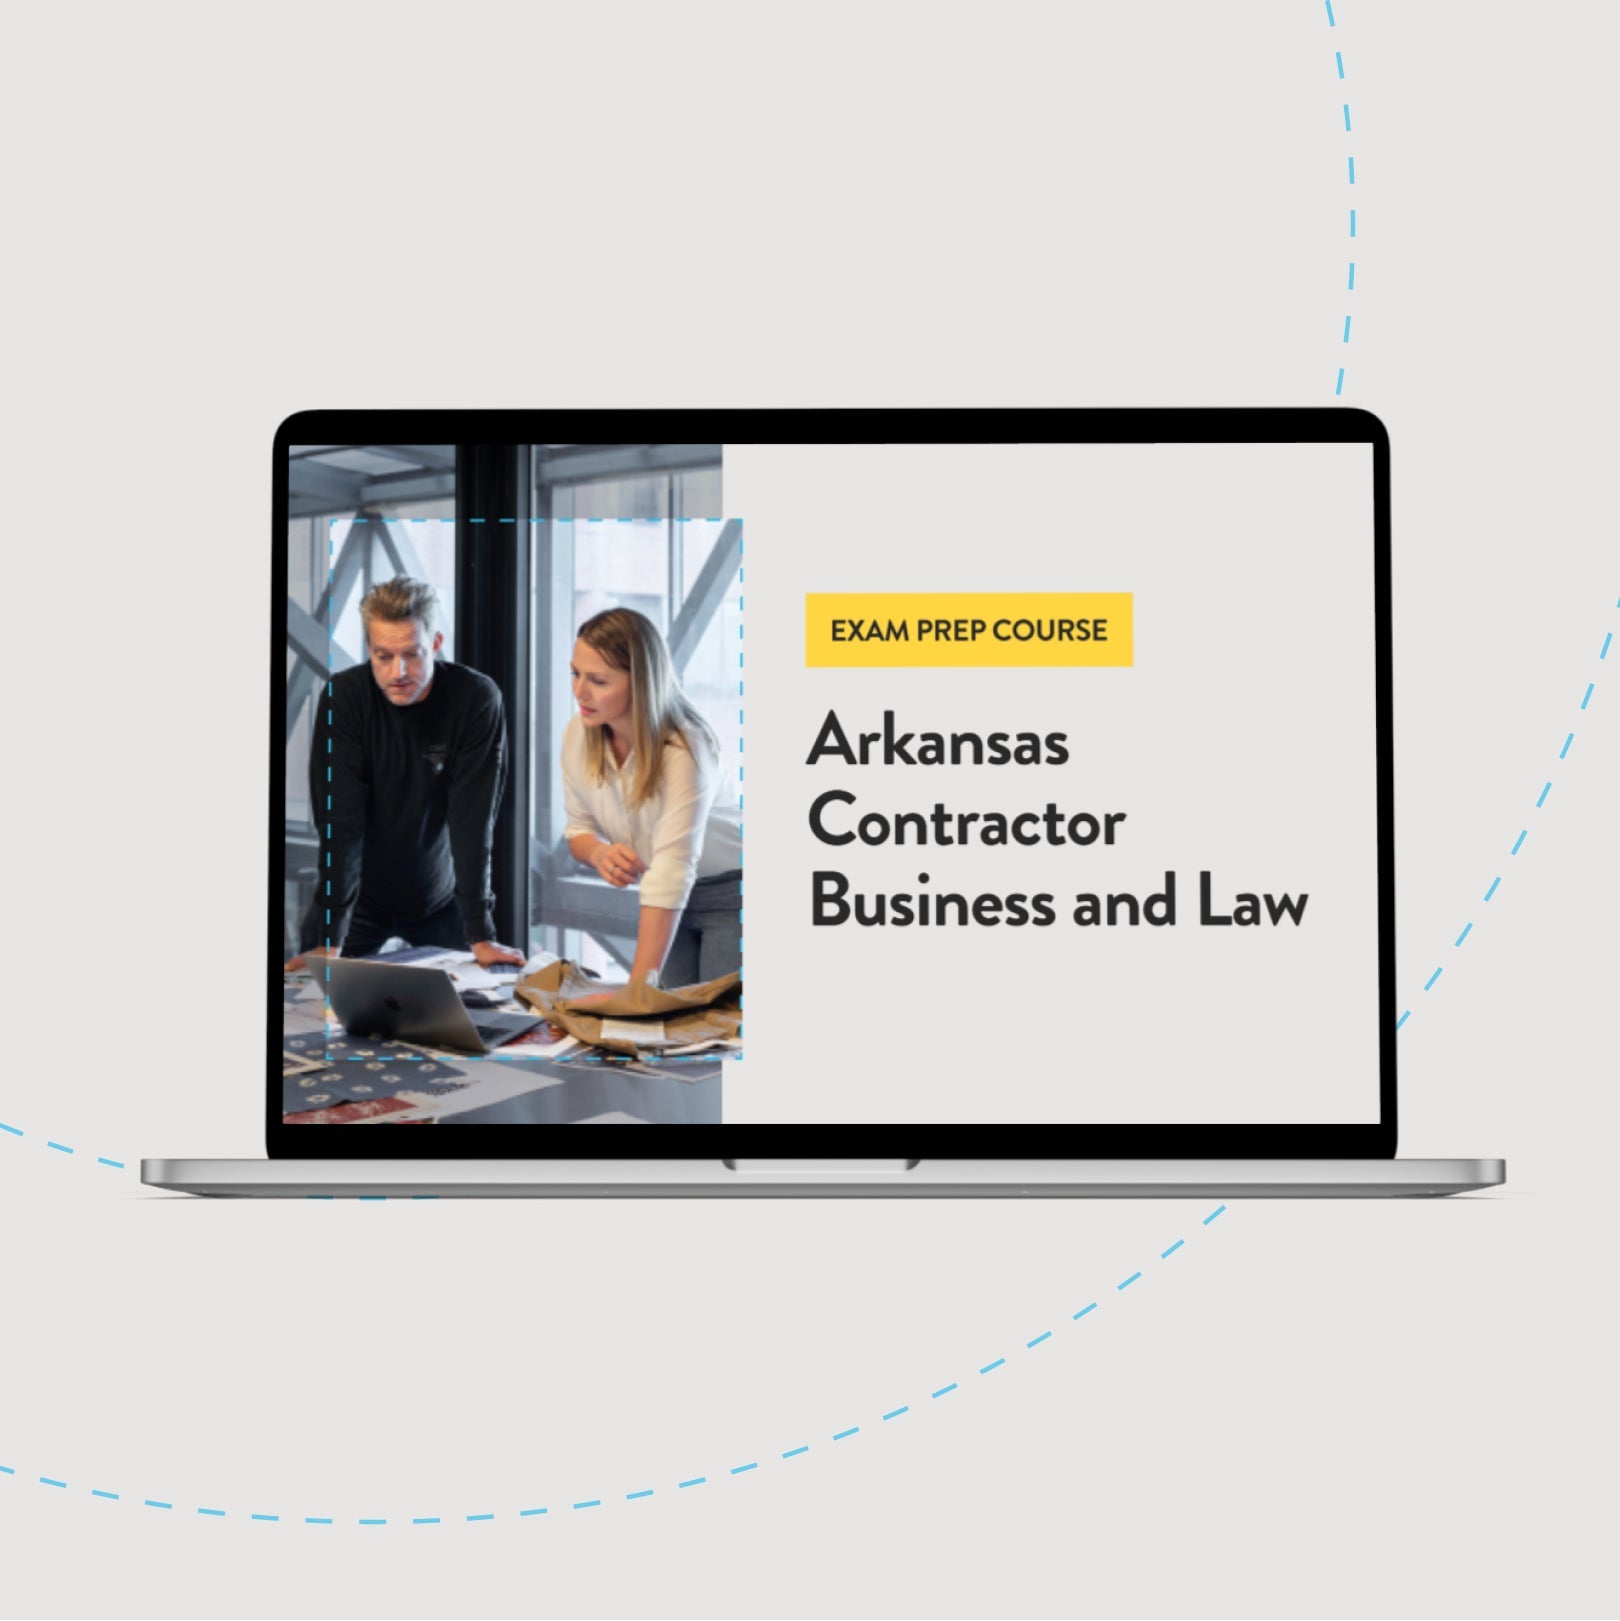 Arkansas Contractor Business and Law Exam Prep Course